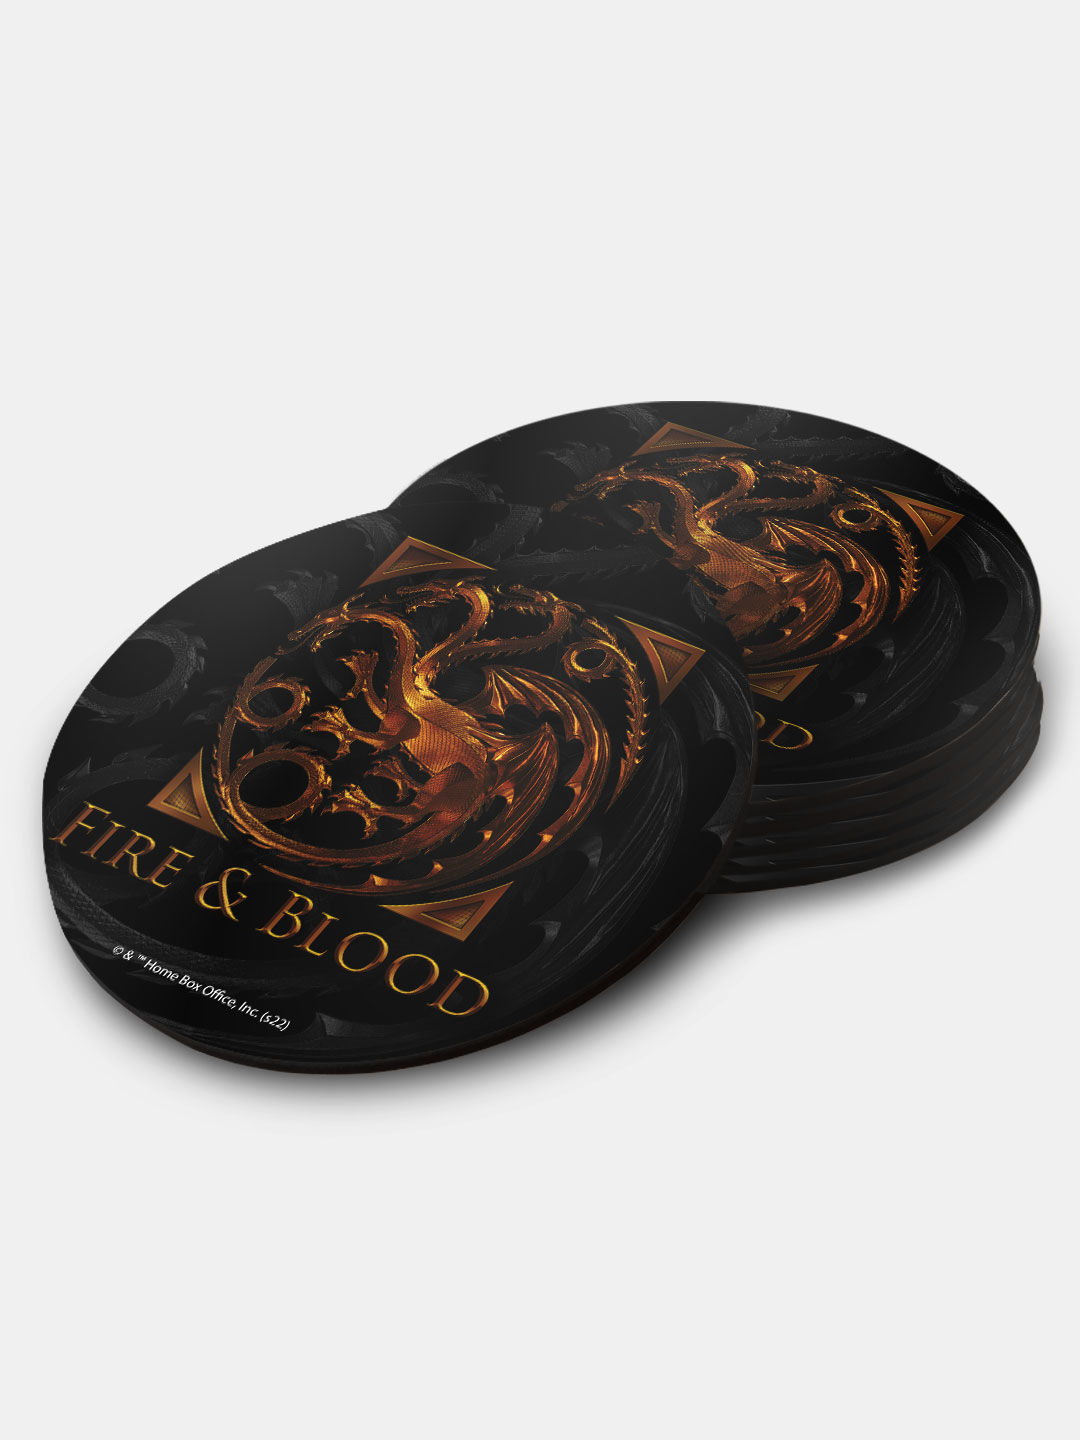 Buy HOD Fire and blood - Circular Coasters Coasters Online